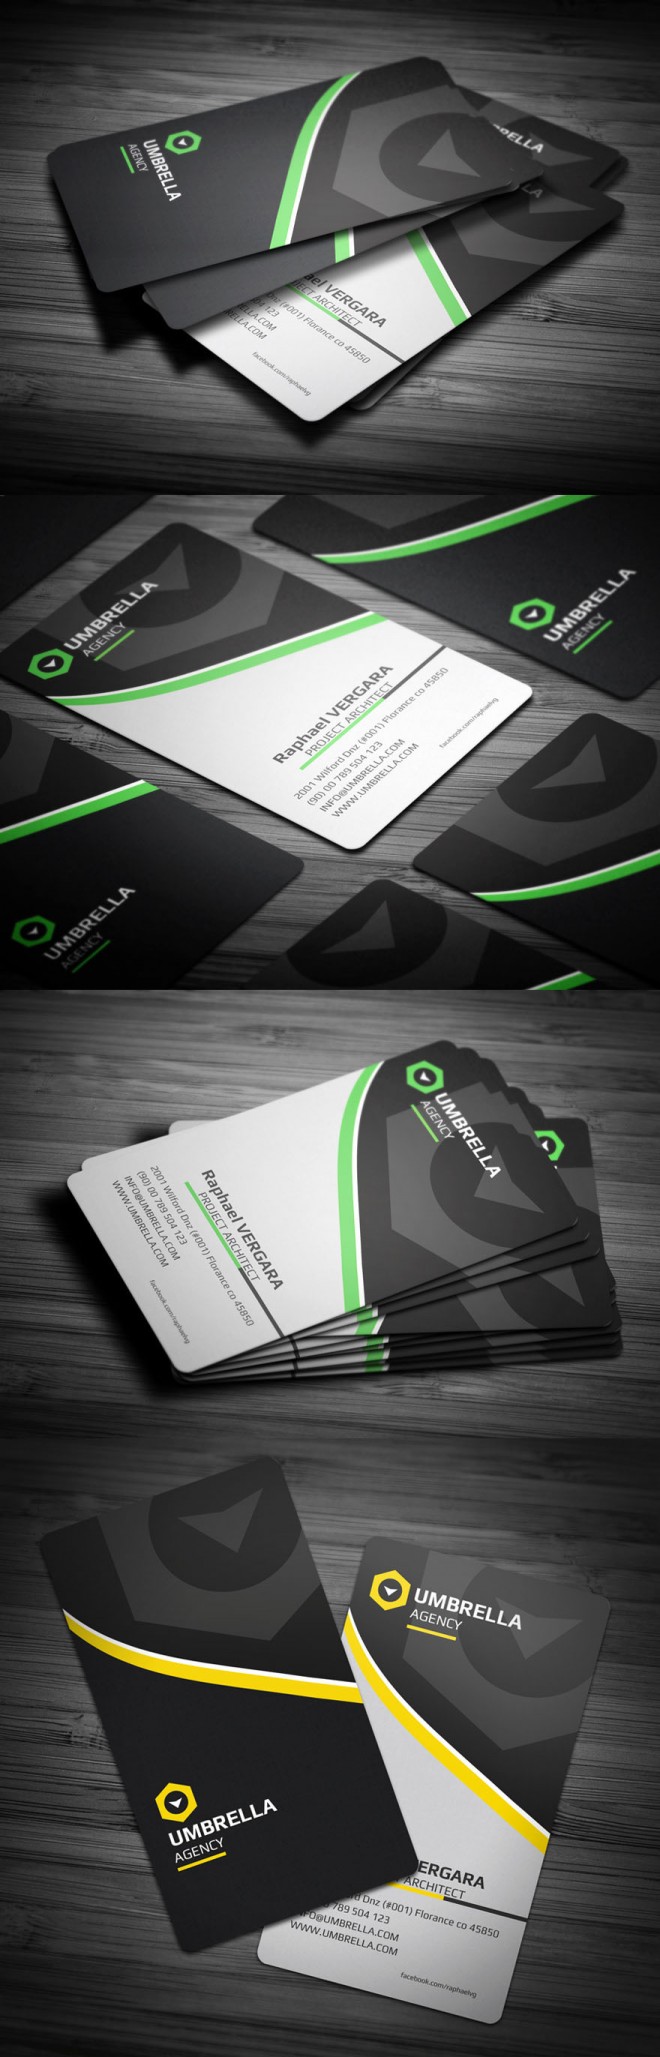 7-corporate-business-card-design.preview